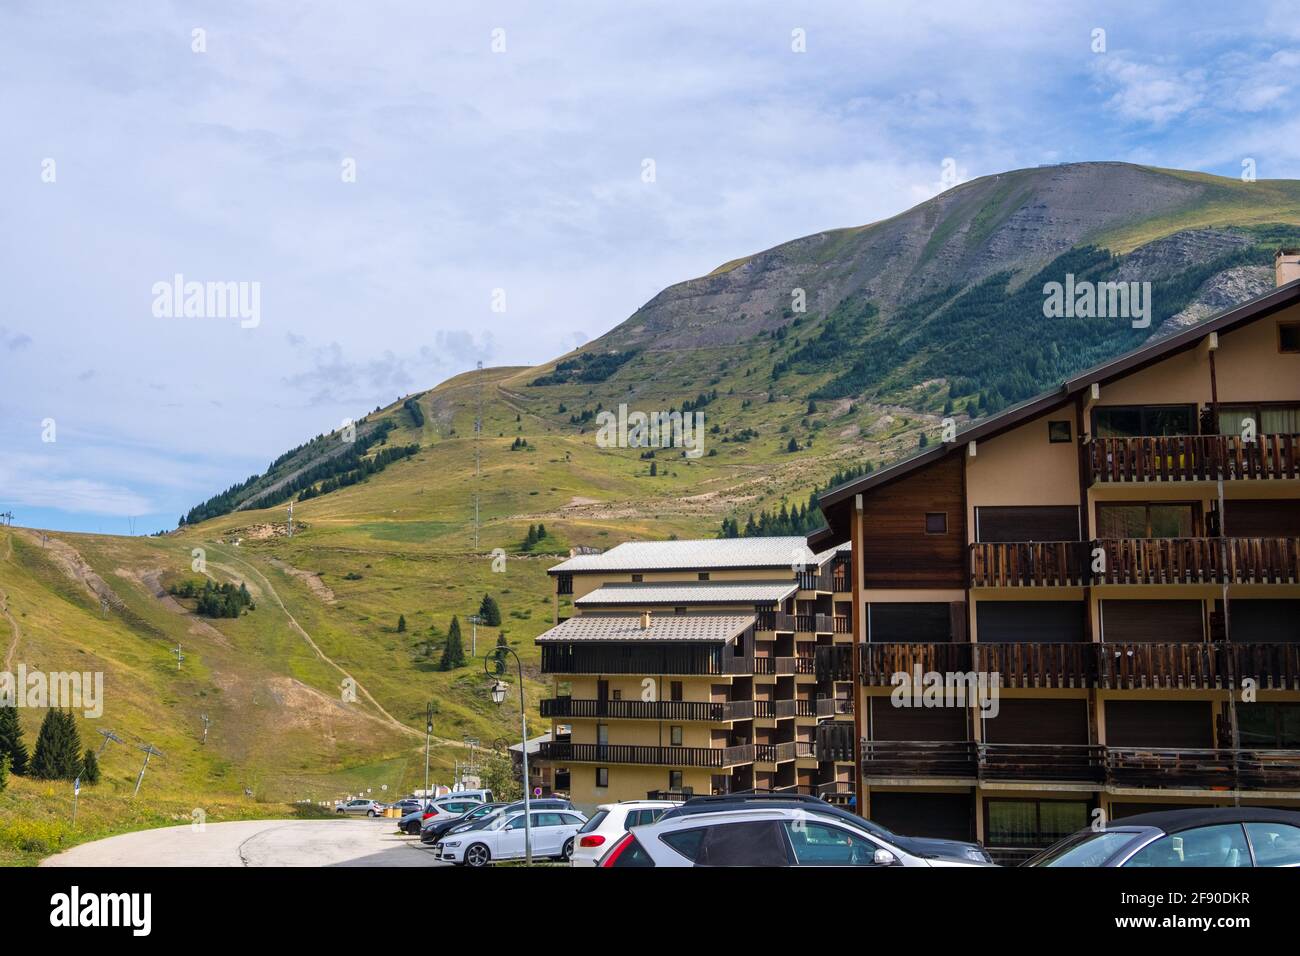 Auris, Isere, France - August 22, 2019: Scenic view of Alpine landscape in Auris en Oisans resort in Northern Alps, Isere department, France Stock Photo